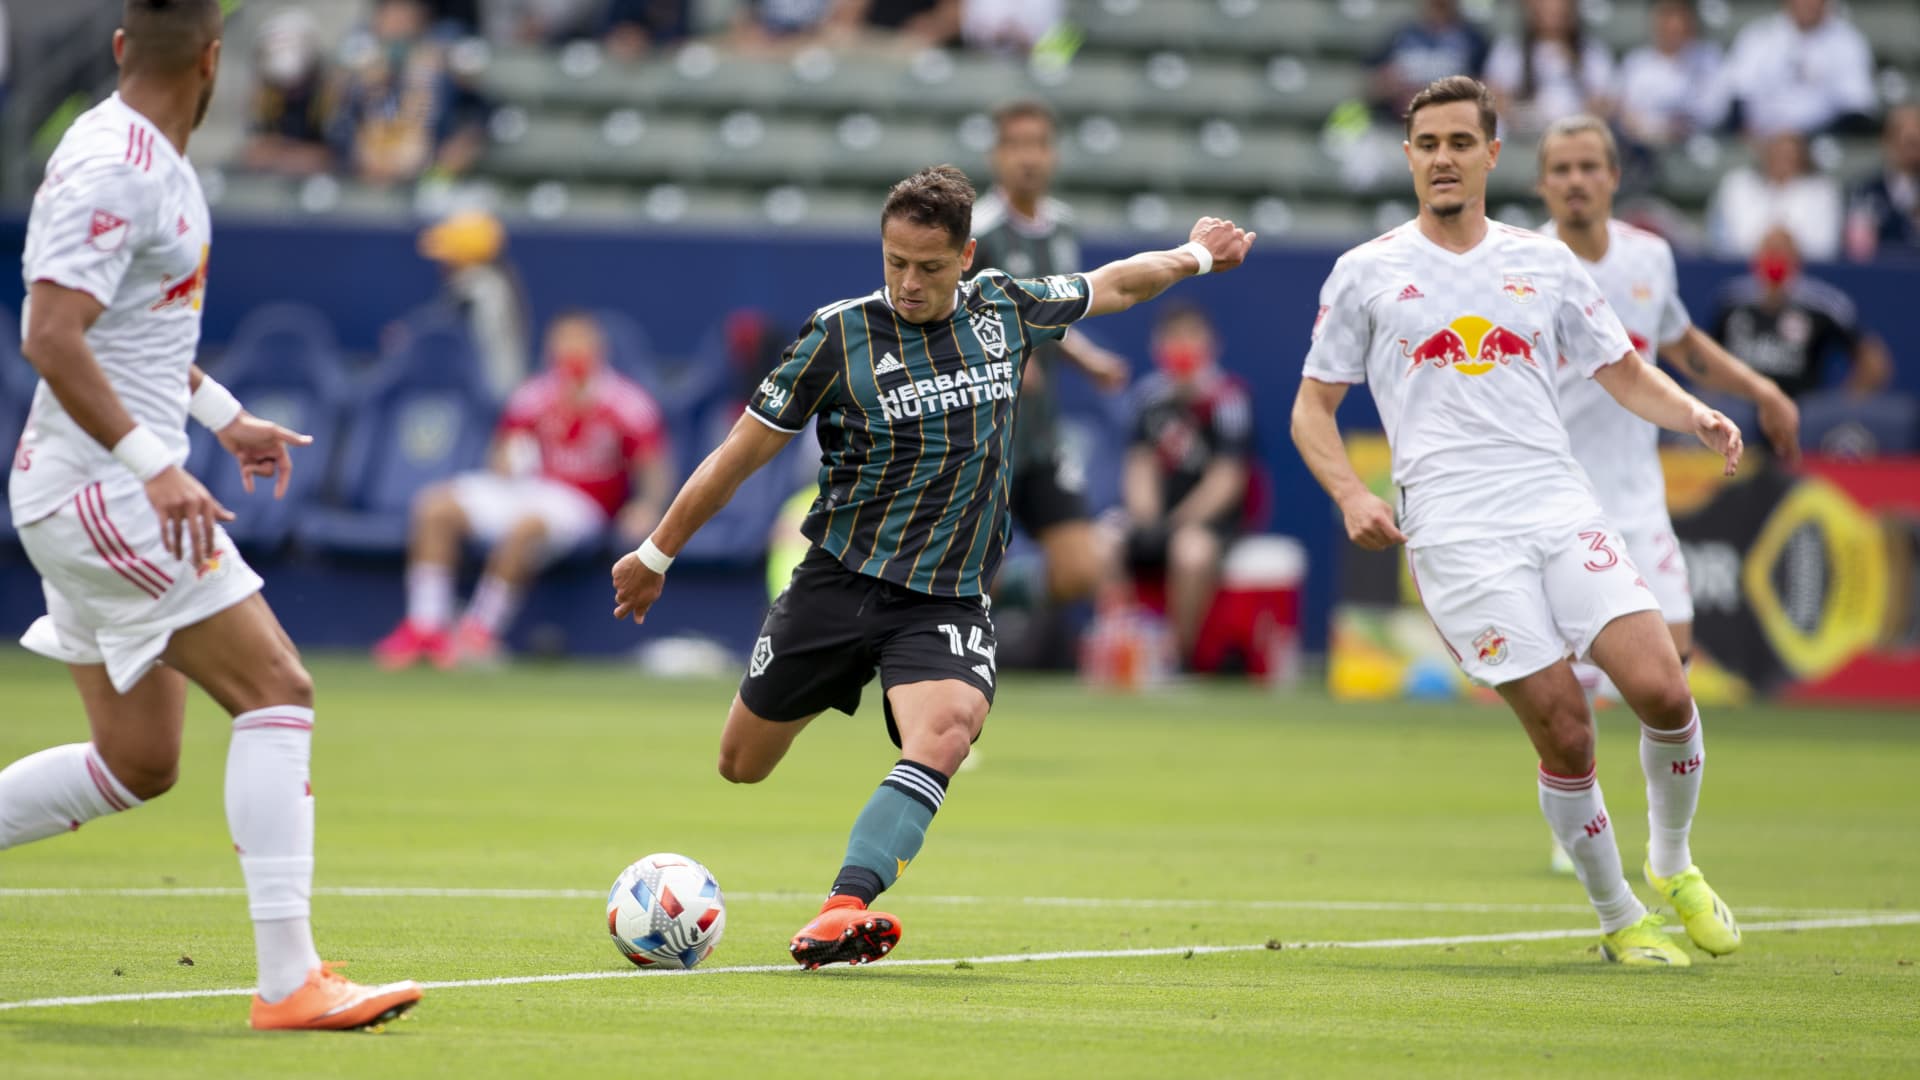 Javier Hernandez #14 of the Los Angeles Galaxy takes a shot on goal during a game between New York Red Bulls and Los Angeles Galaxy at Dignity Health Sports Park on April 25, 2021 in Carson, California.